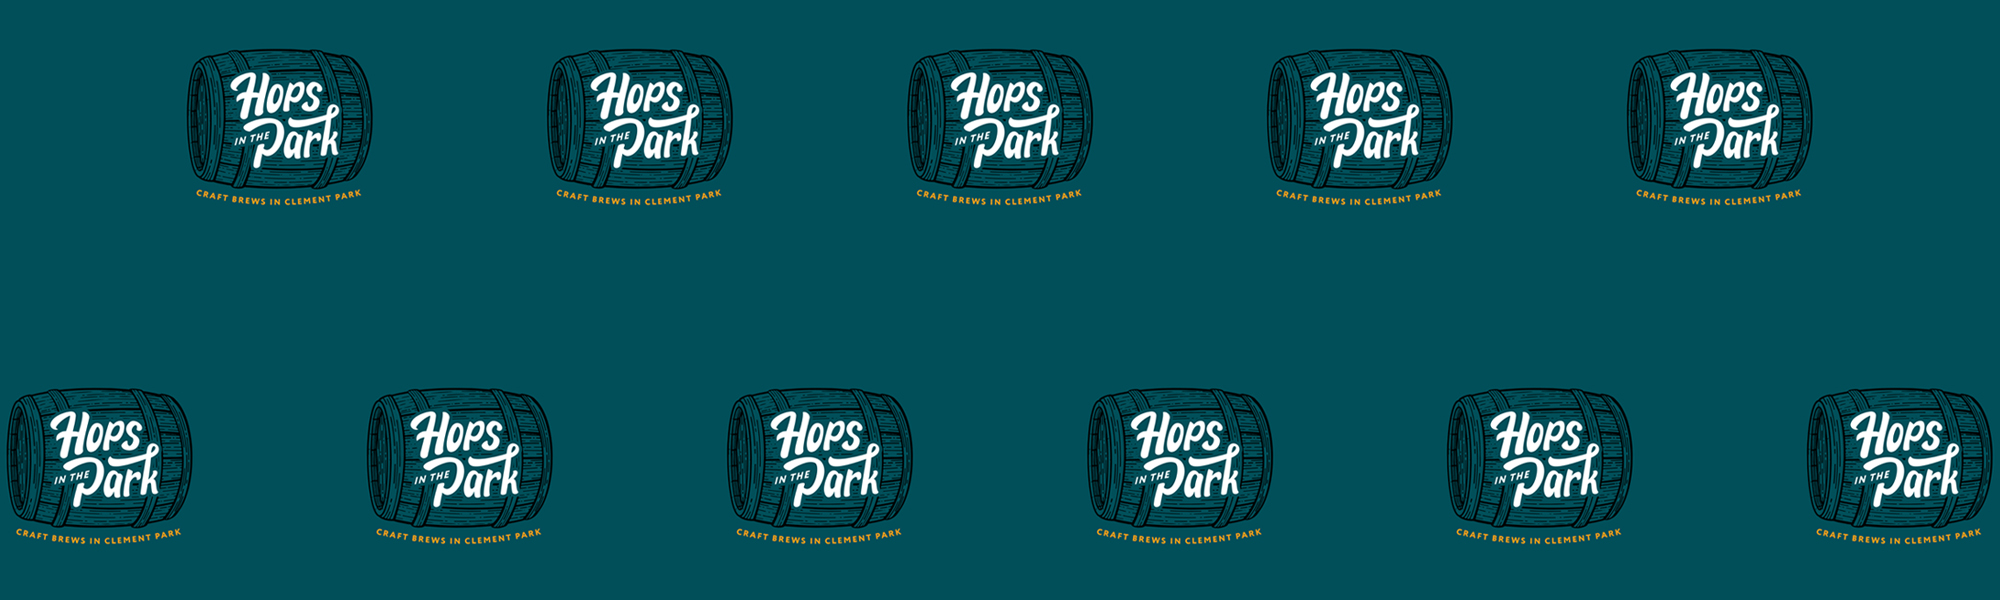 Hops in the Park event logo repeated on teal background